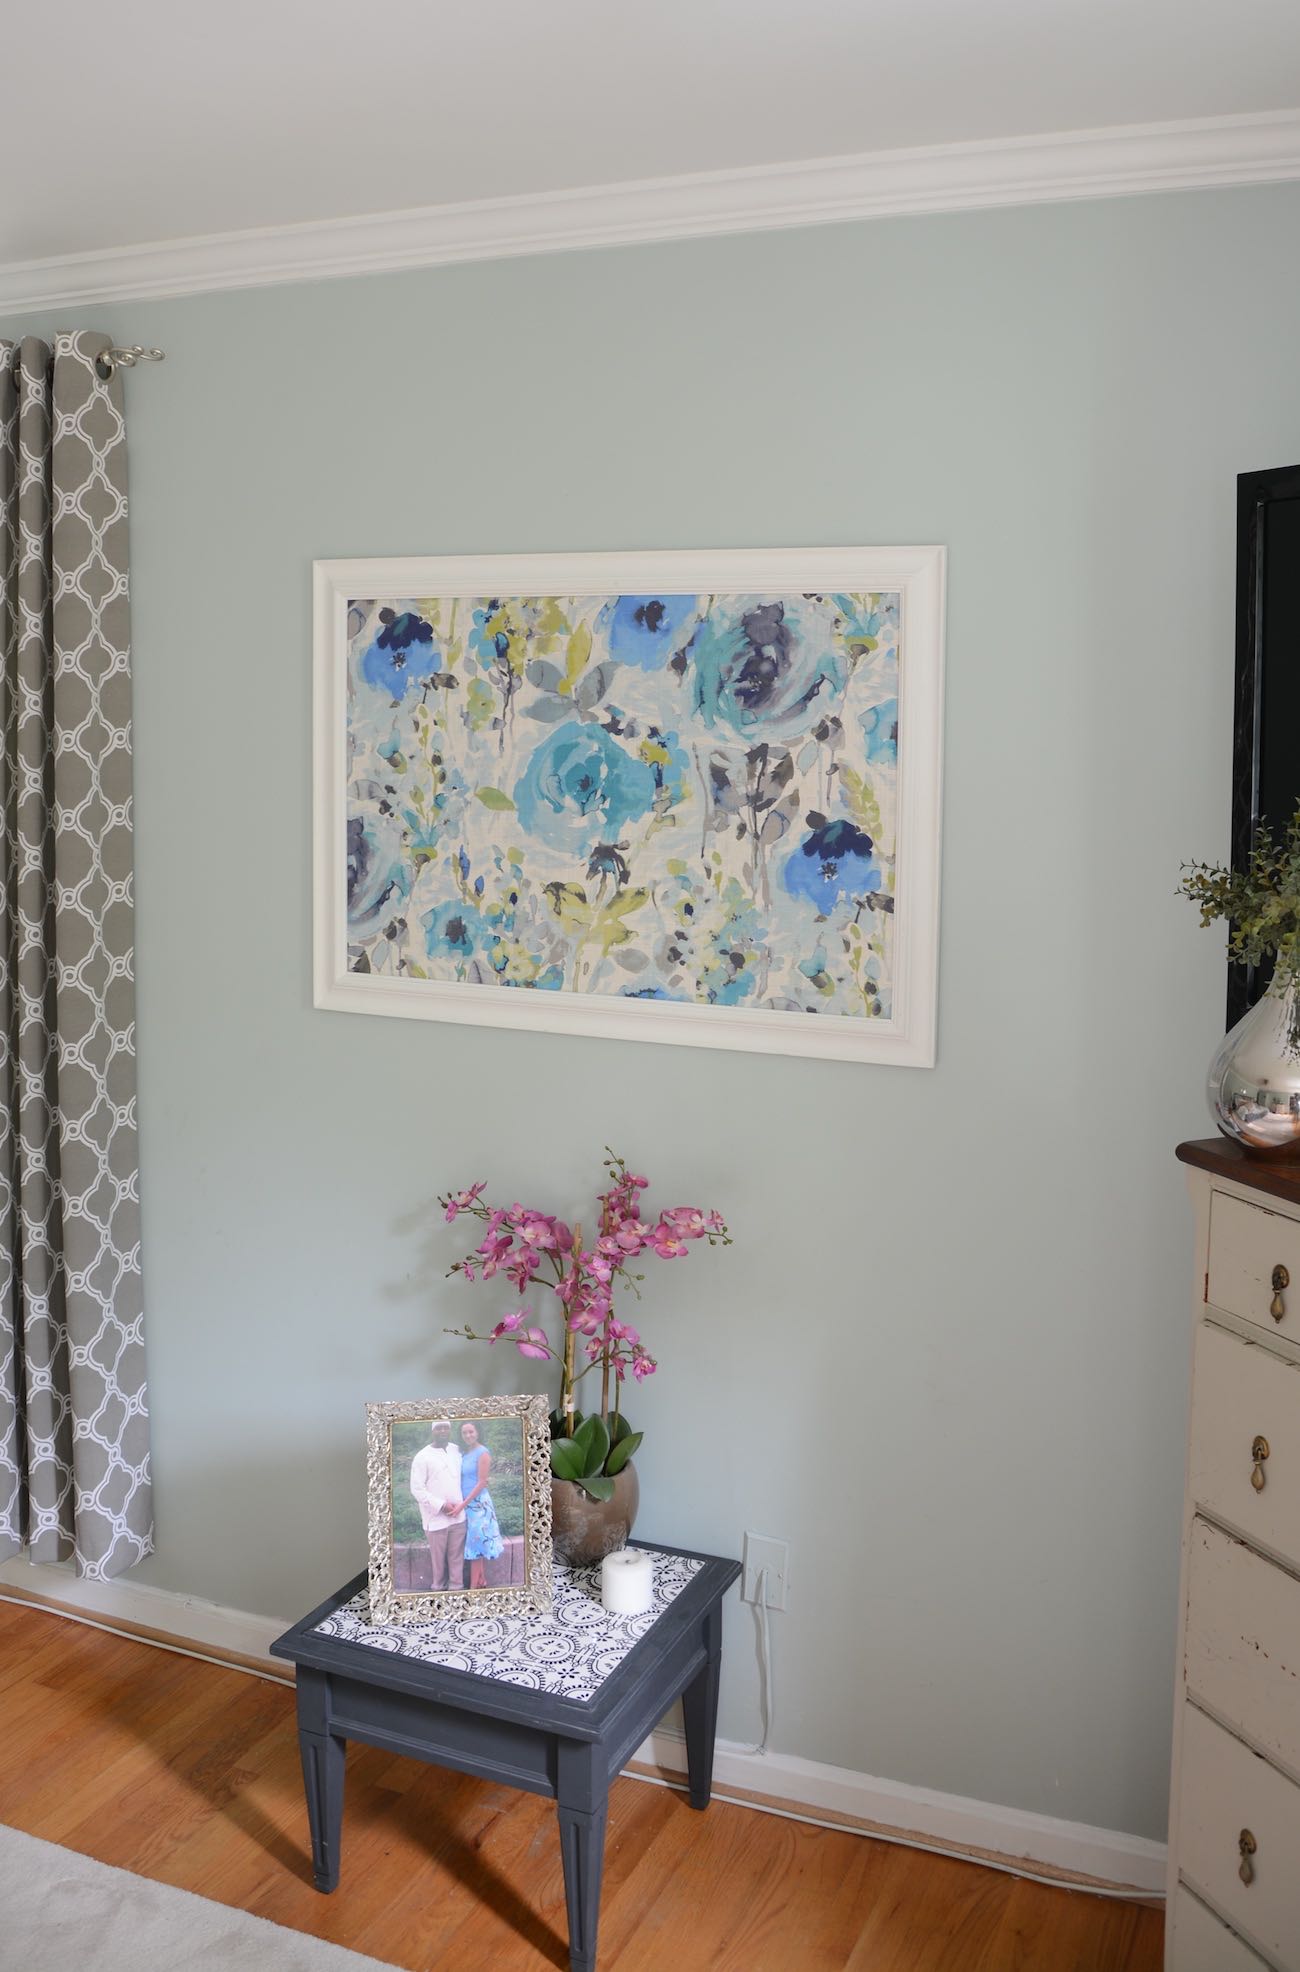 How to Frame Fabric for Wall Art With a Picture Frame